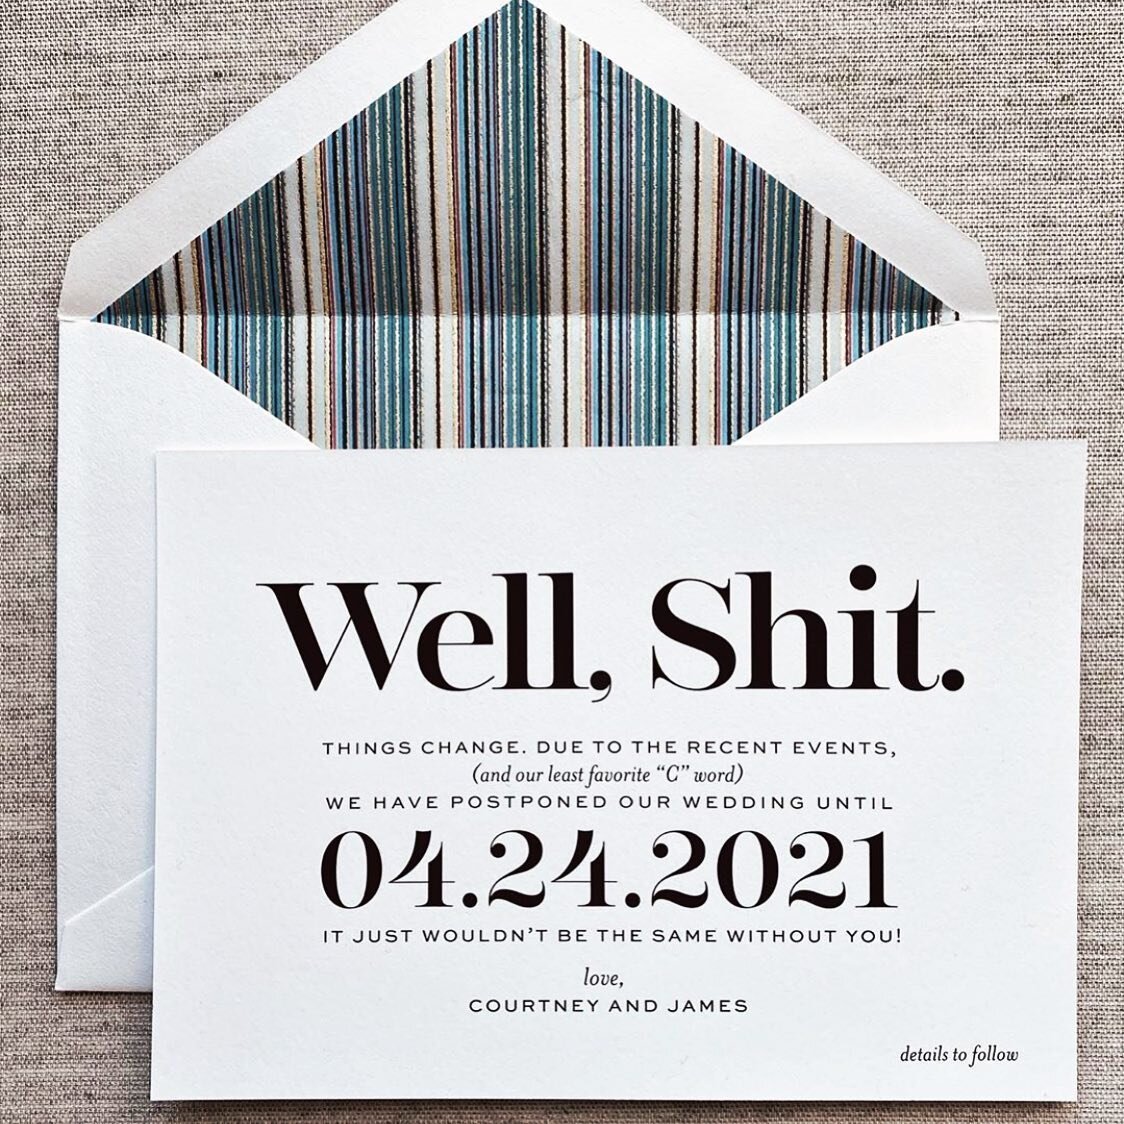 DAMM STRAIGHT | Have you been struggling on what to say to guest and loved ones? This beauty is straight to the point and we love it! Via @insideweddings @1elizabethgrace
.
.
.
.
.
#postponed #postponedwedding #covid19 #wedding #guestlist #2020 #wedd